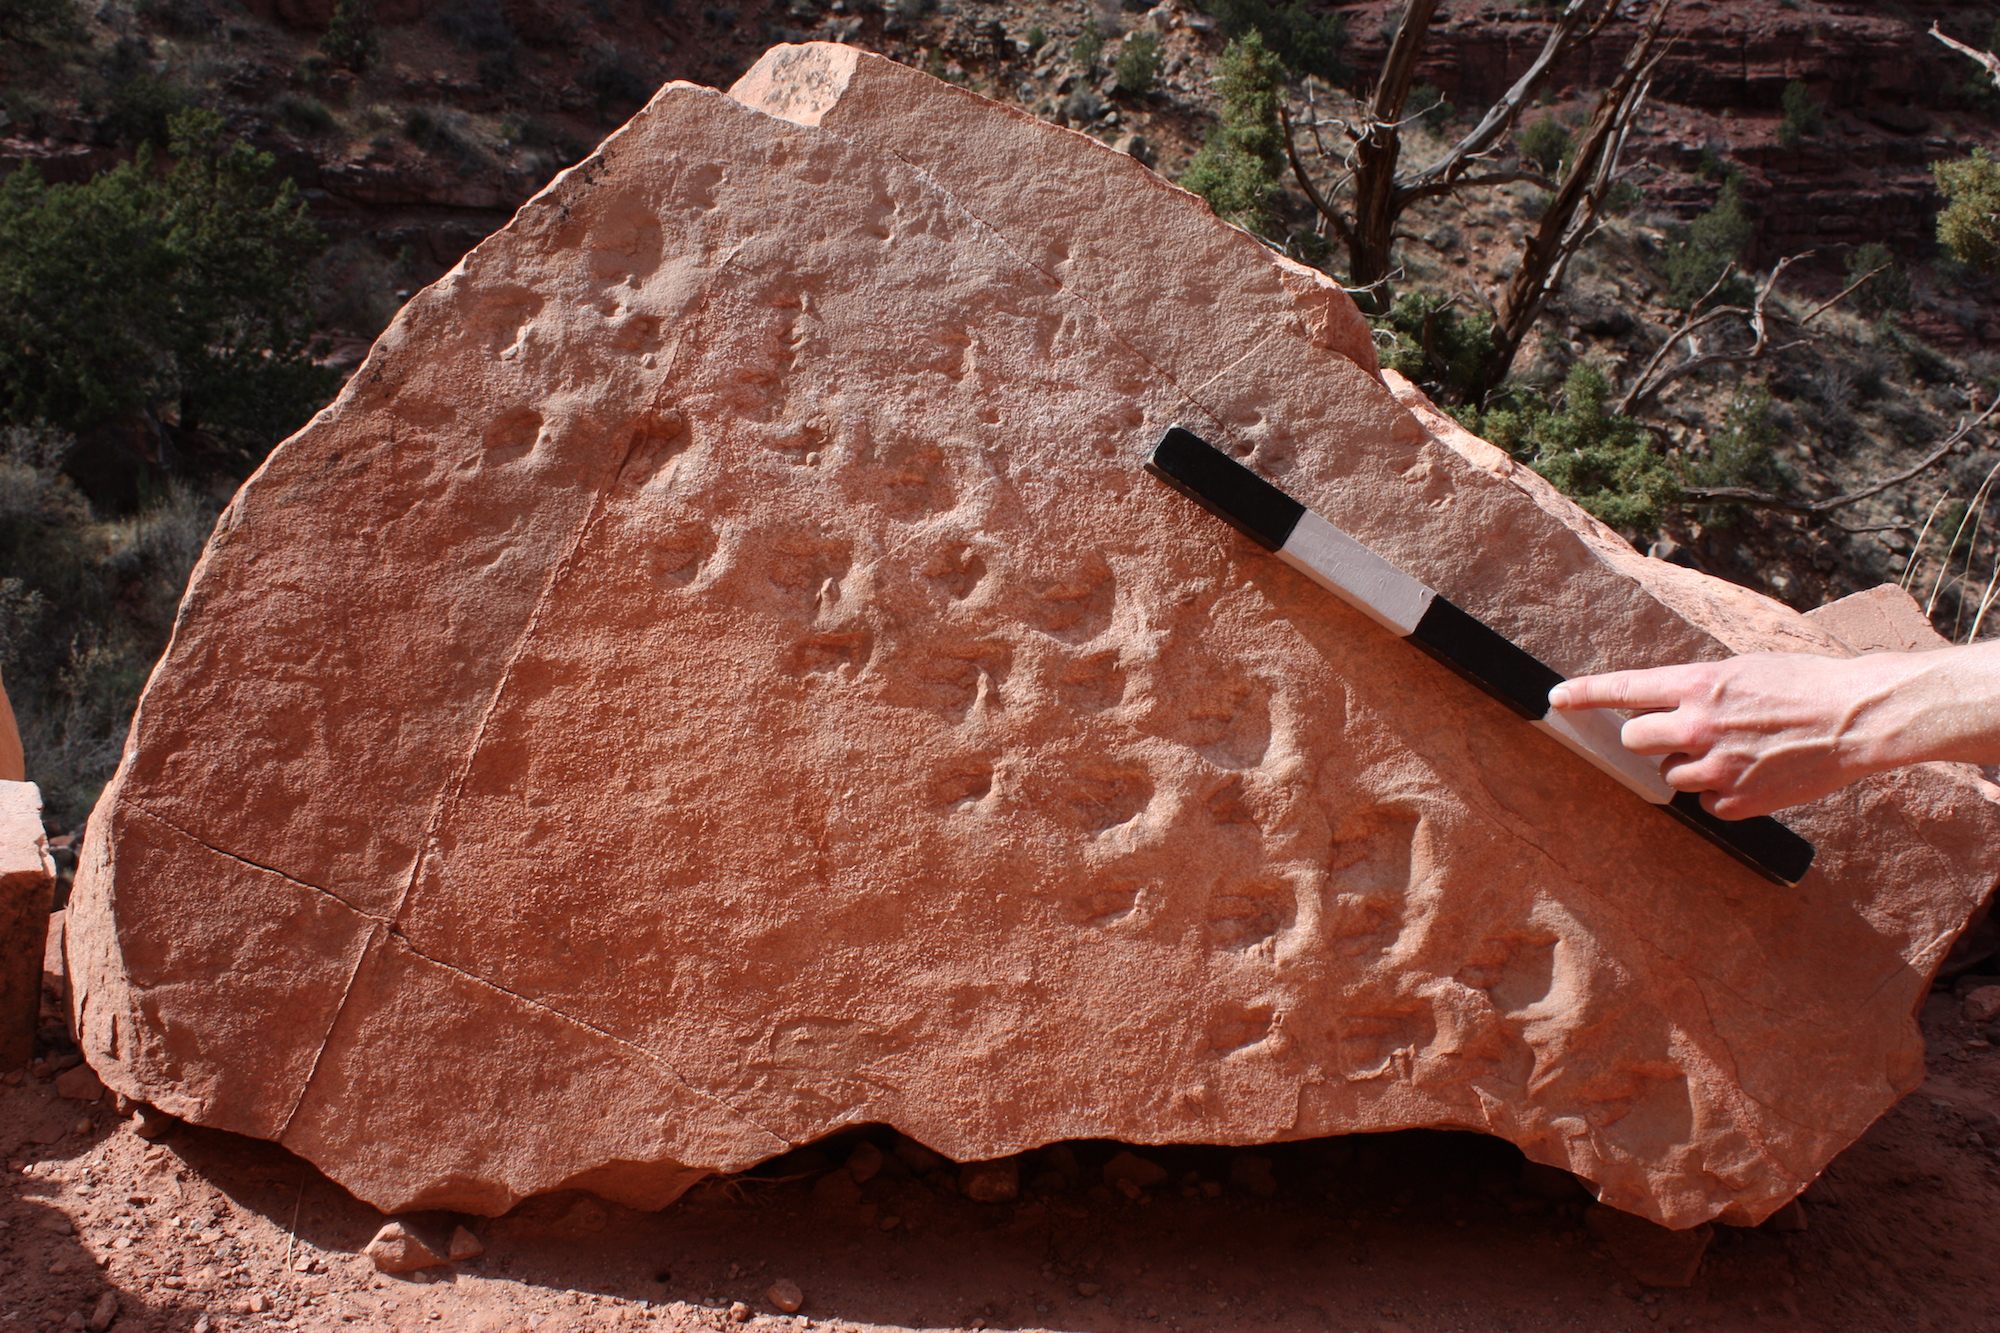 Found: The Grand Canyon's Oldest Vertebrate Fossil - Atlas Obscura